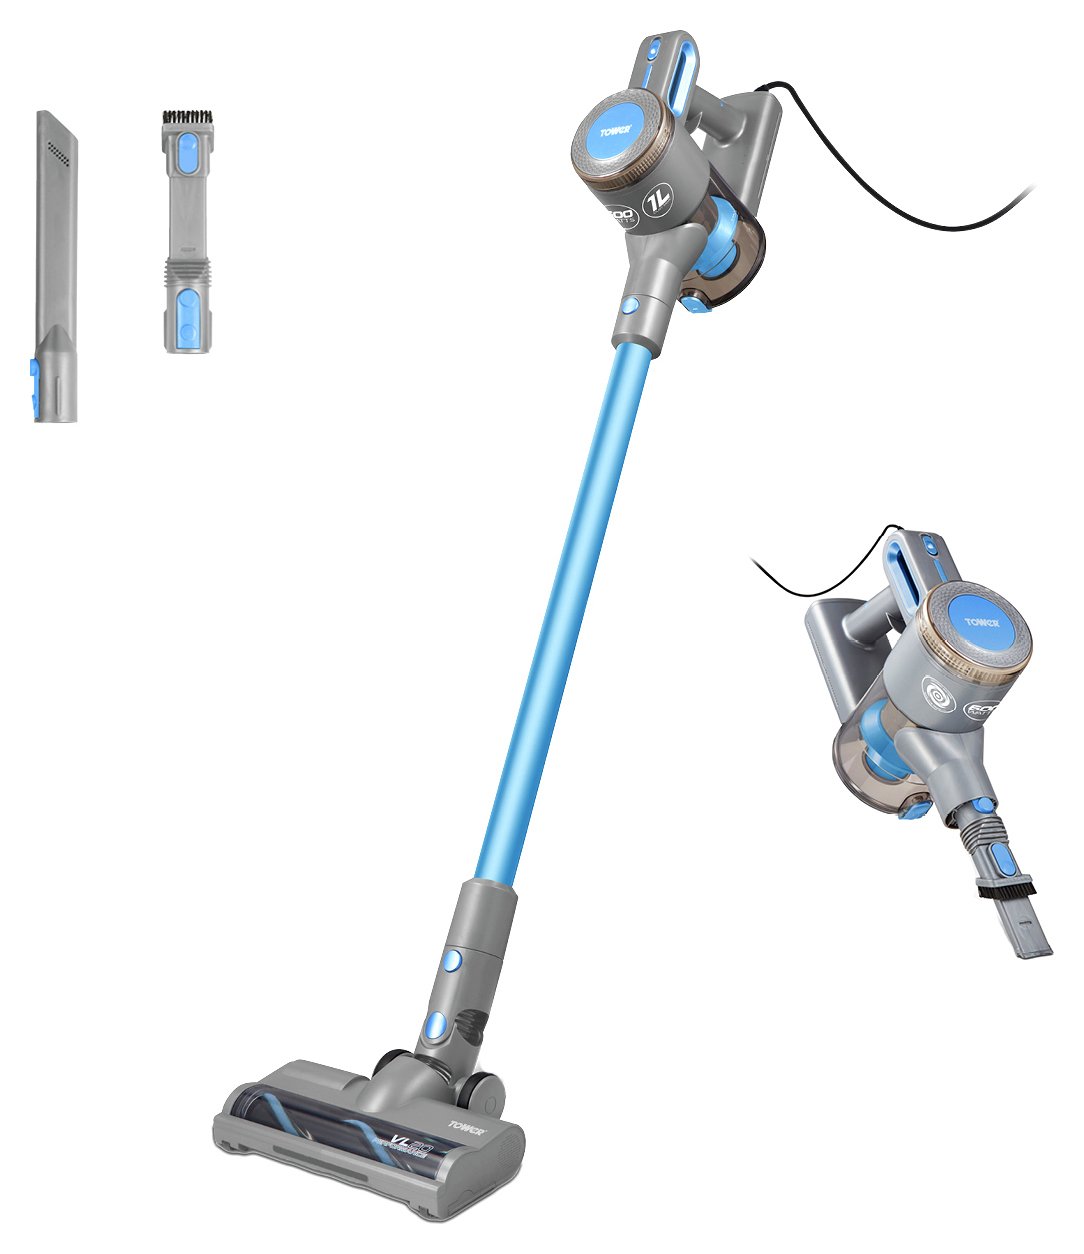 Tower VL20 Performance Corded Vacuum Cleaner